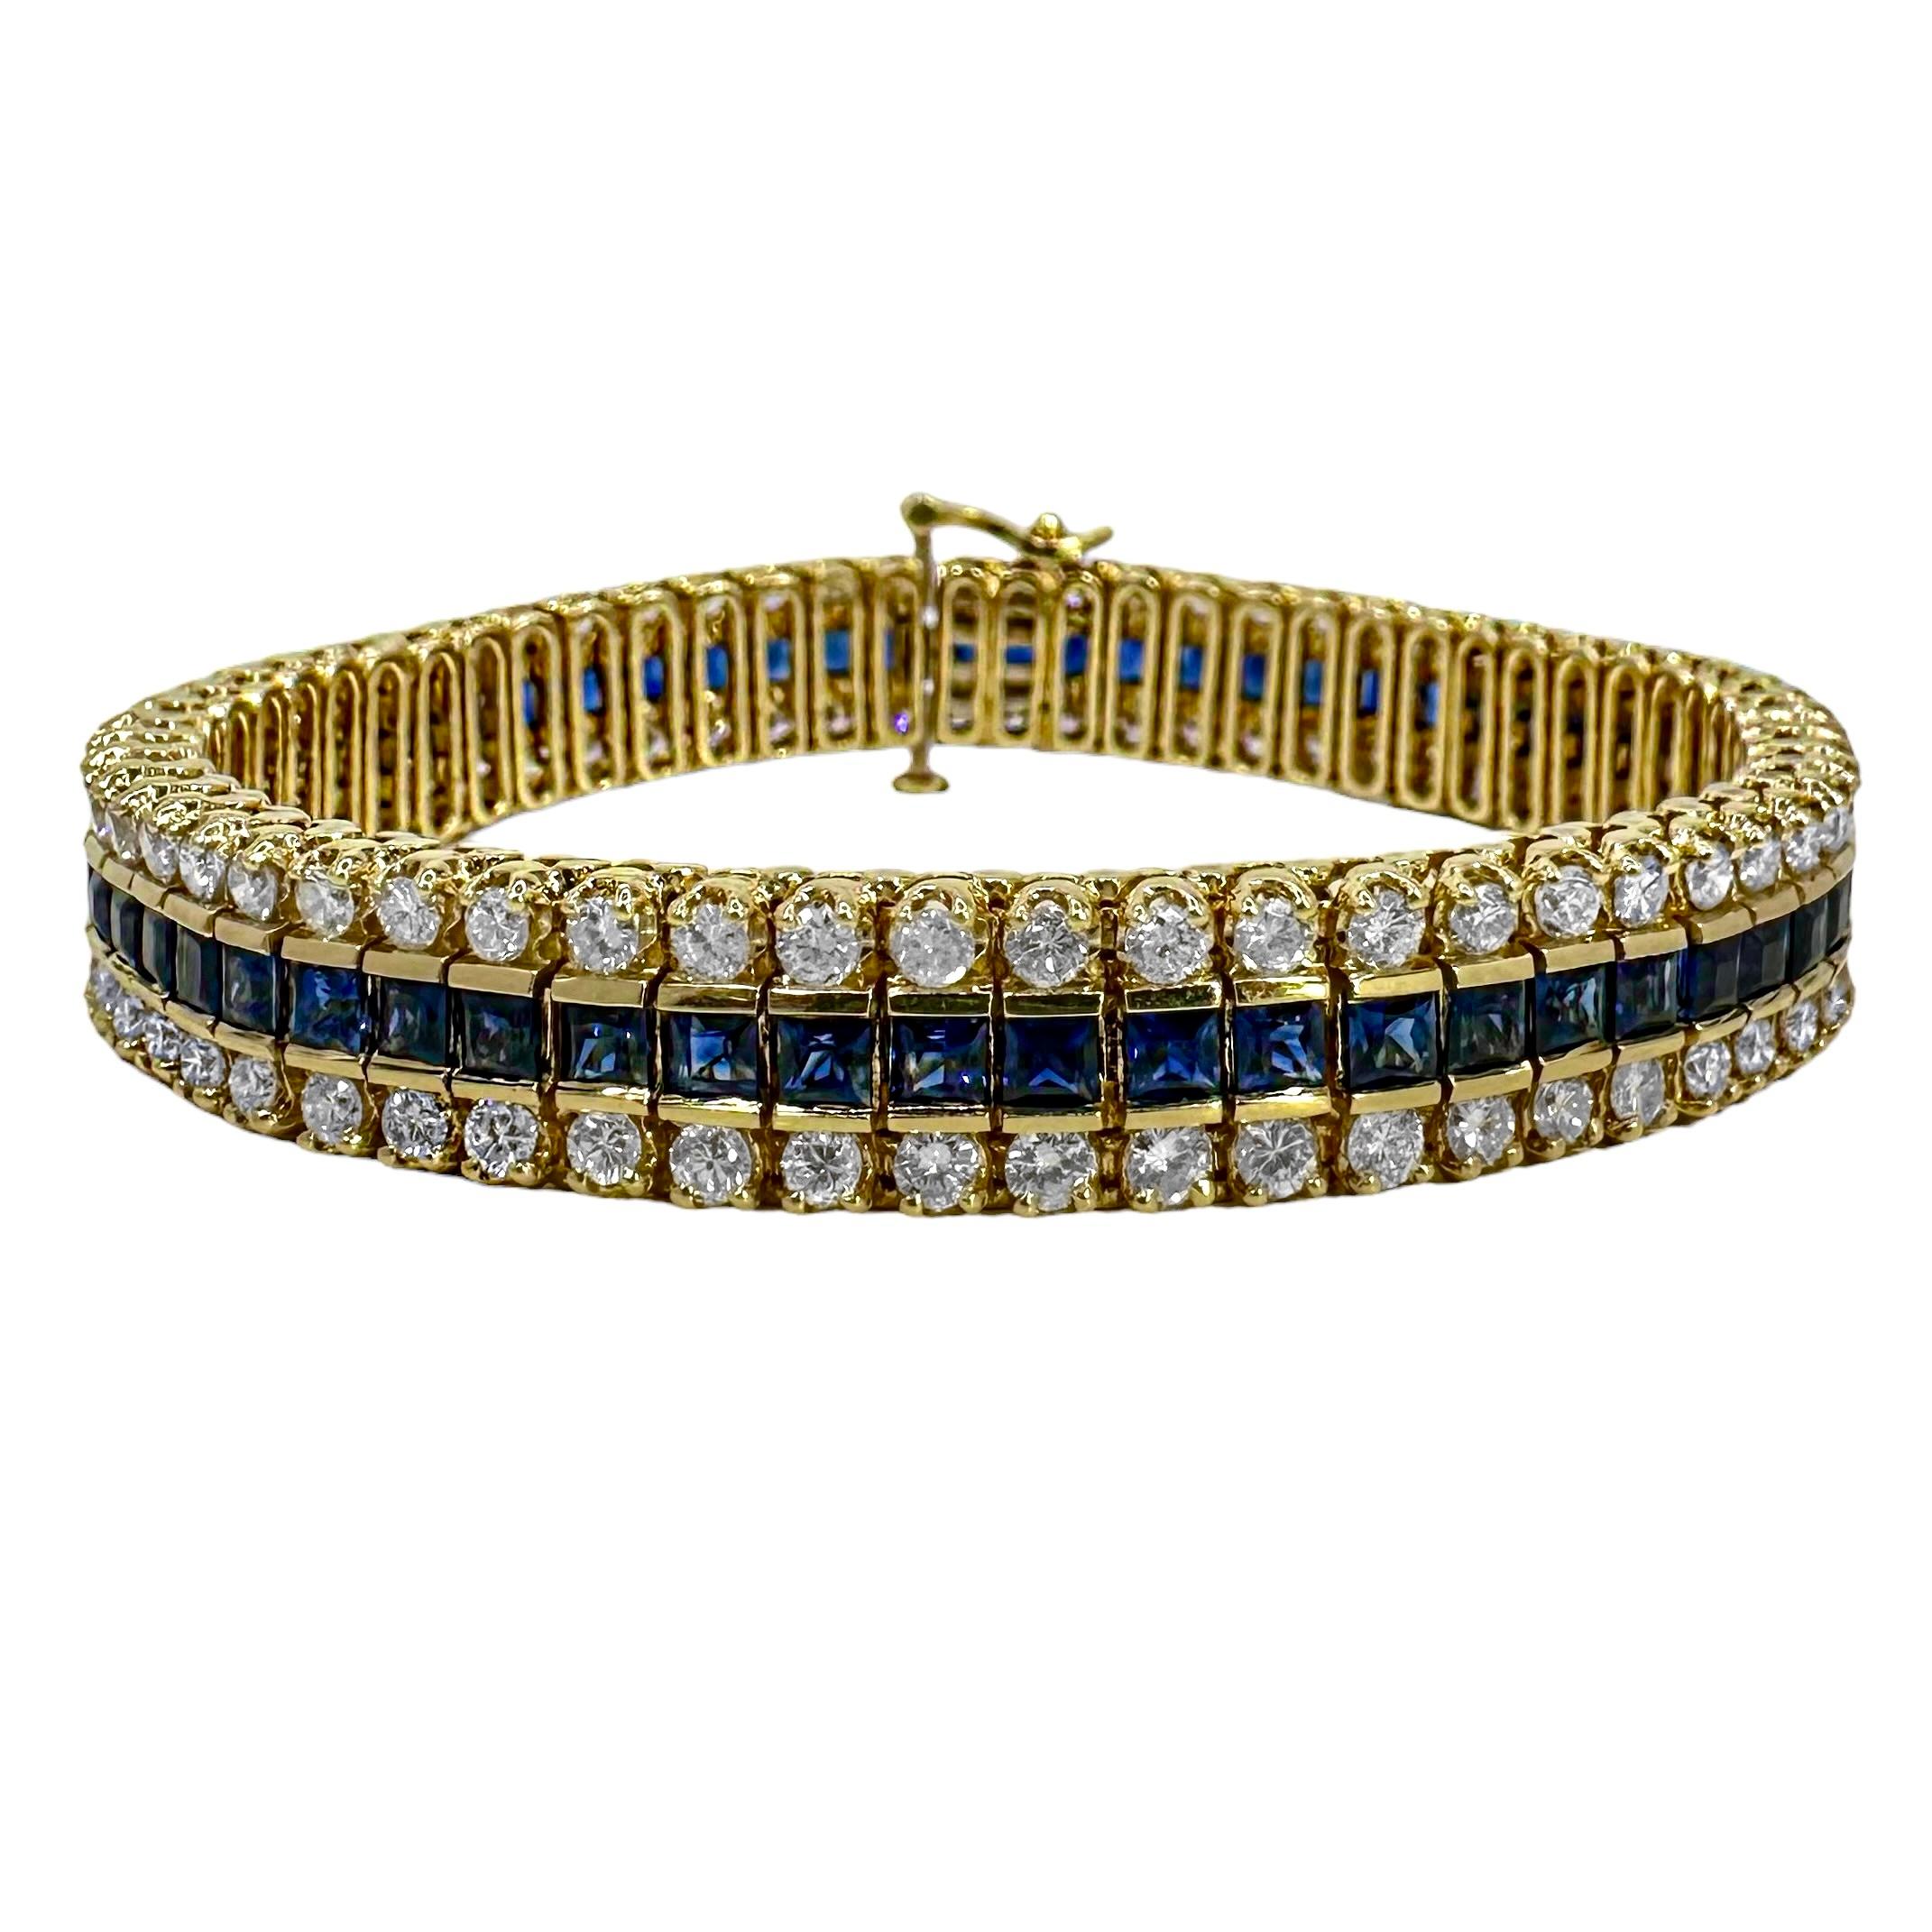 A beautifully made, classic three row bracelet in 14K yellow gold. Centered around a straight line of 45 square cut sapphires set in a channel, are two lines of brilliant cut diamonds, one above the sapphires and one below. The geometric gallery on